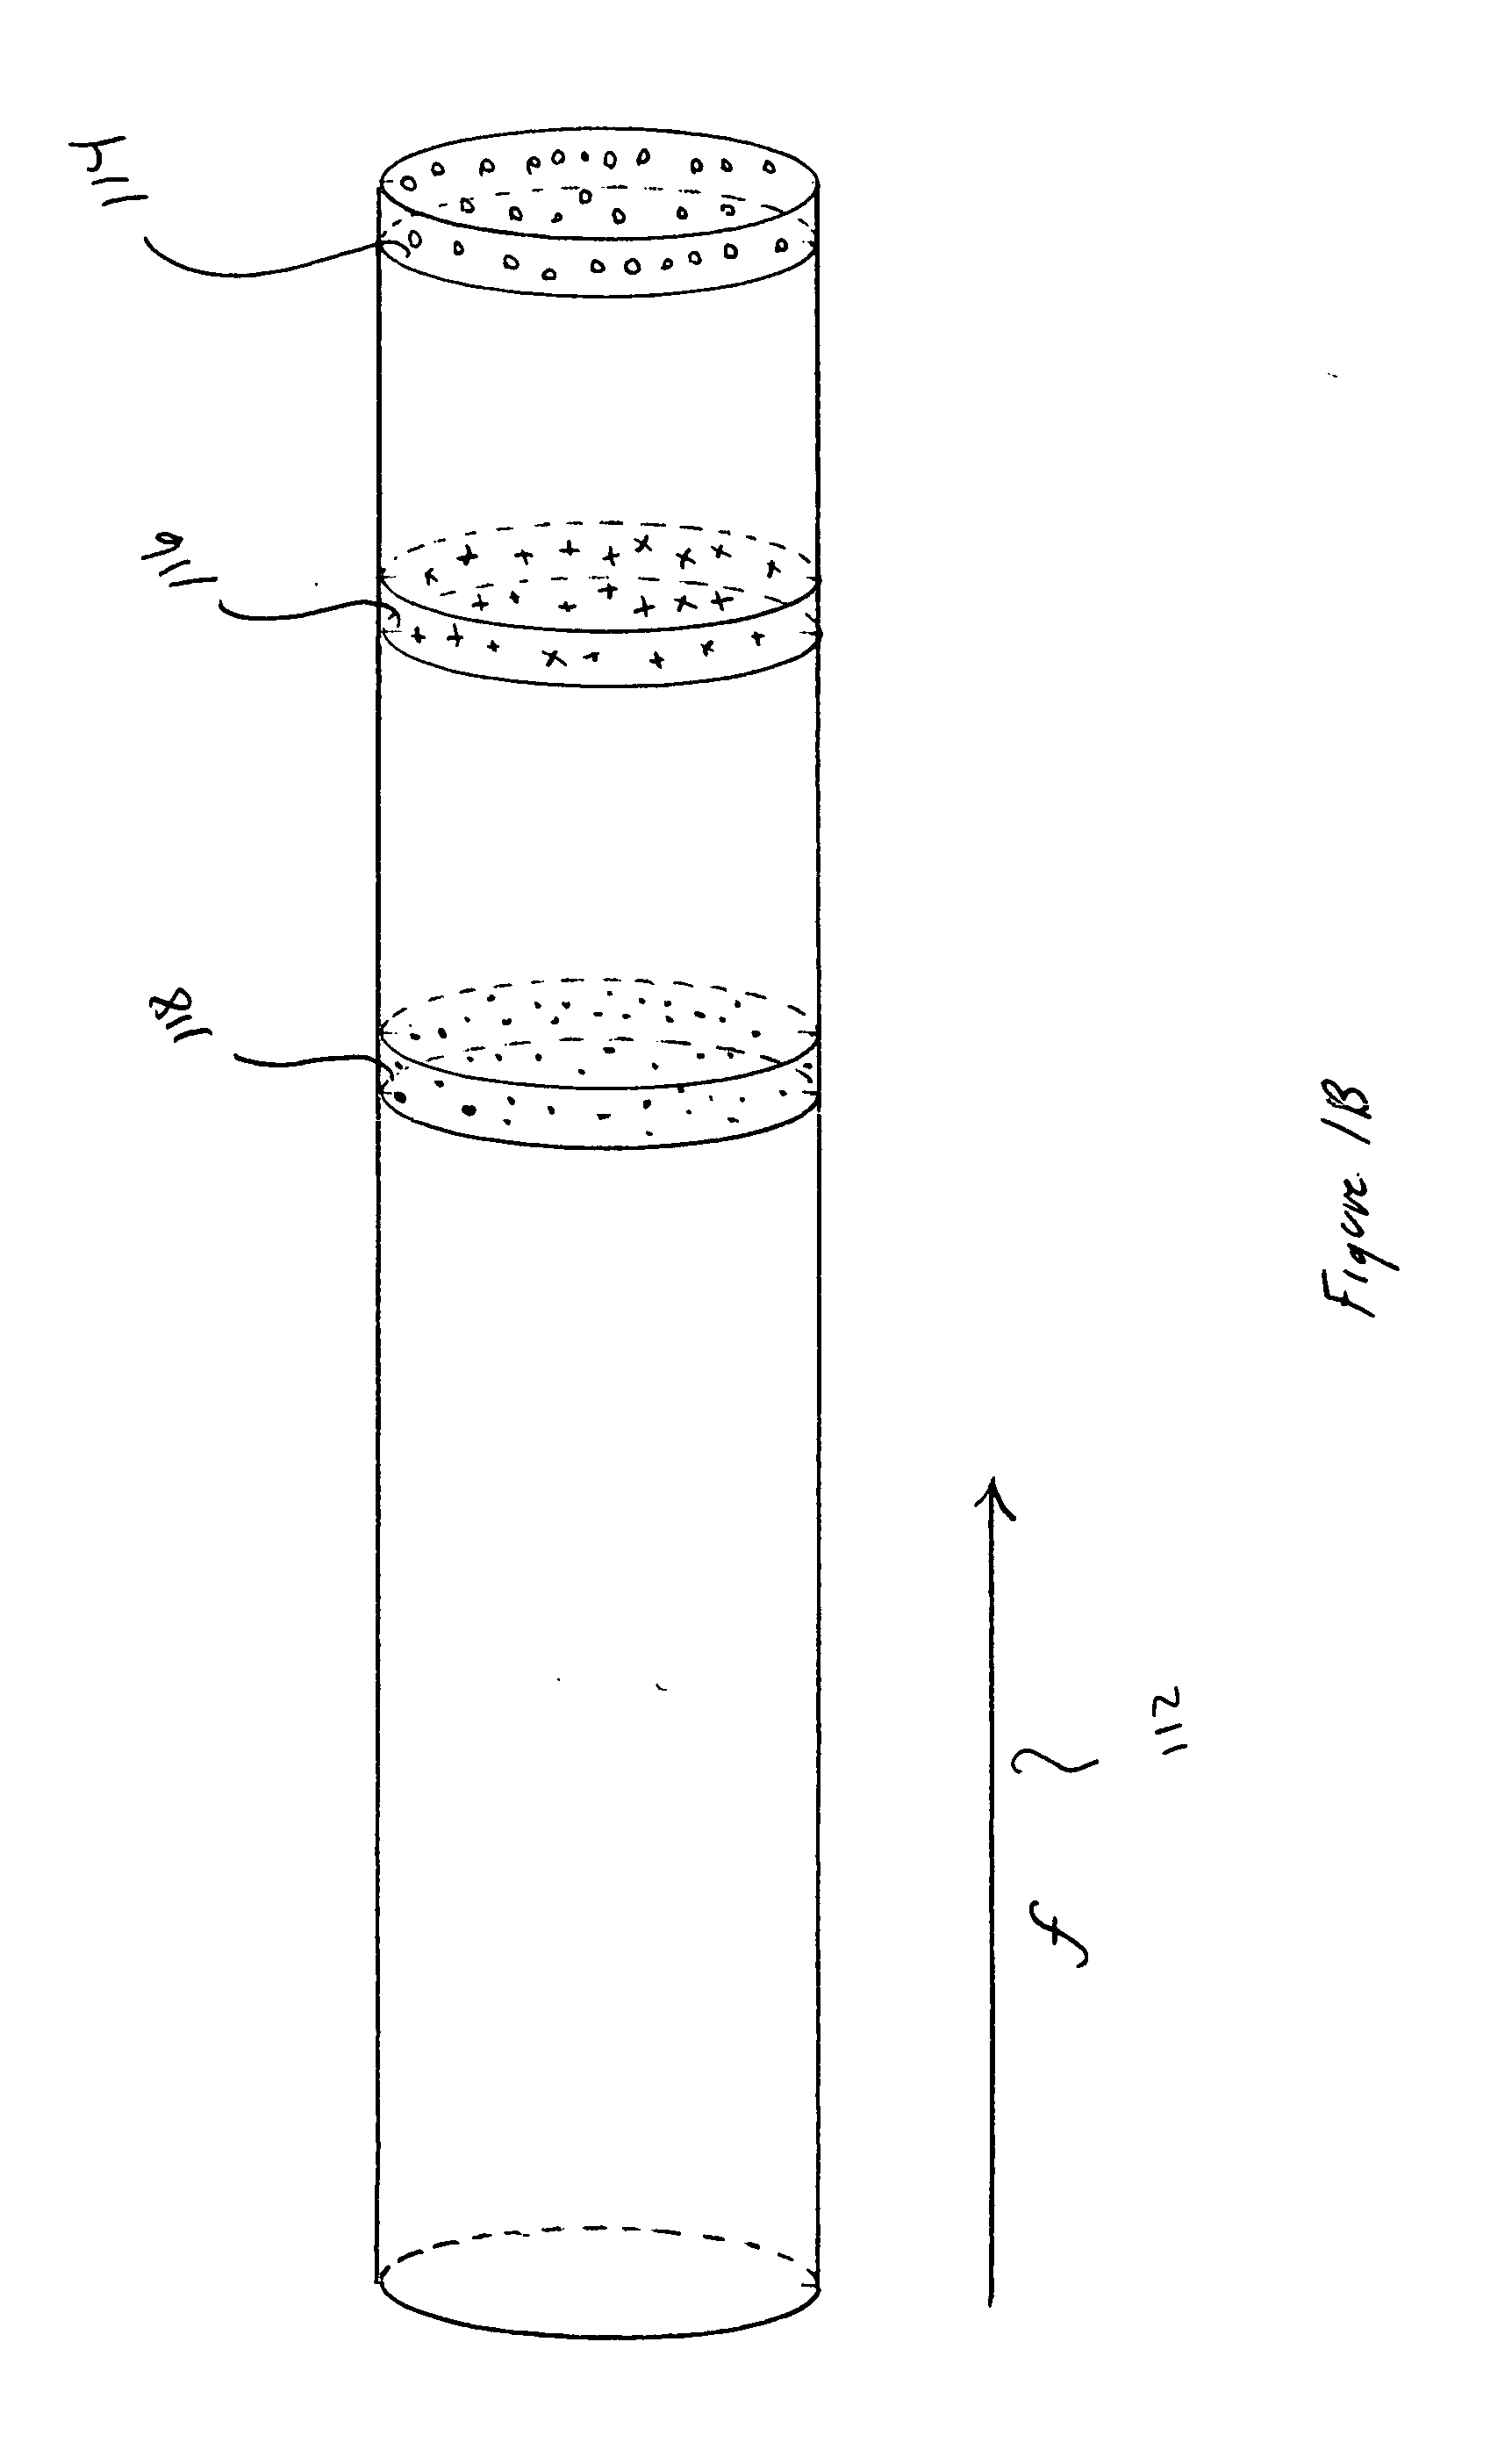 Method and system for electrokinetic, preparative sample separation in high-surface-area separation channels with non-convex cross sections